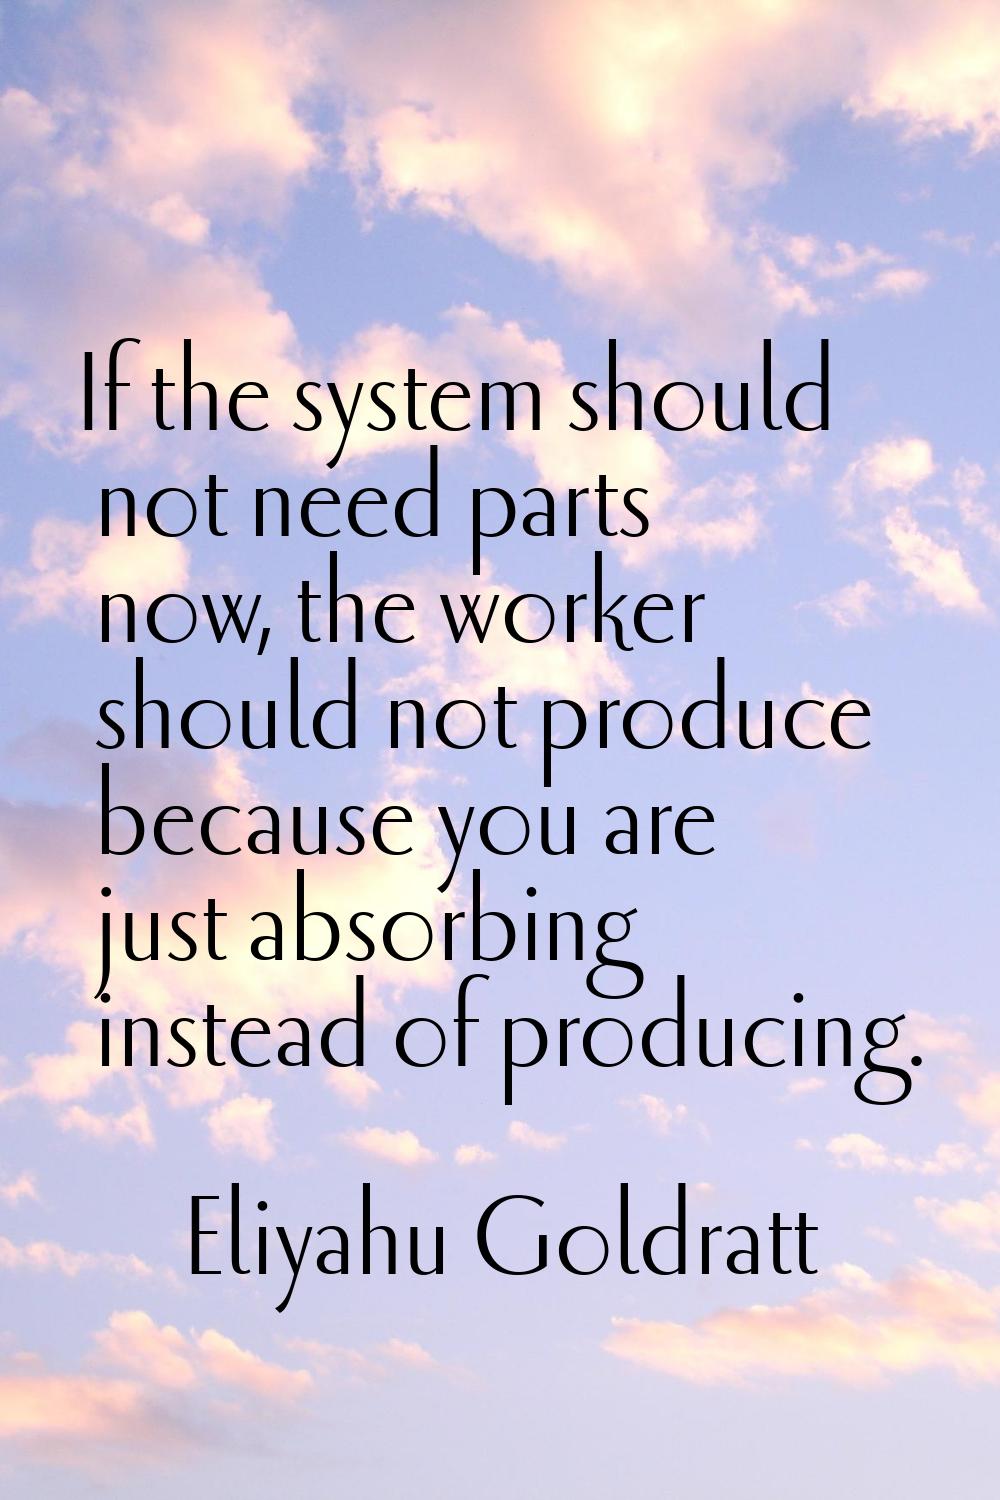 If the system should not need parts now, the worker should not produce because you are just absorbi